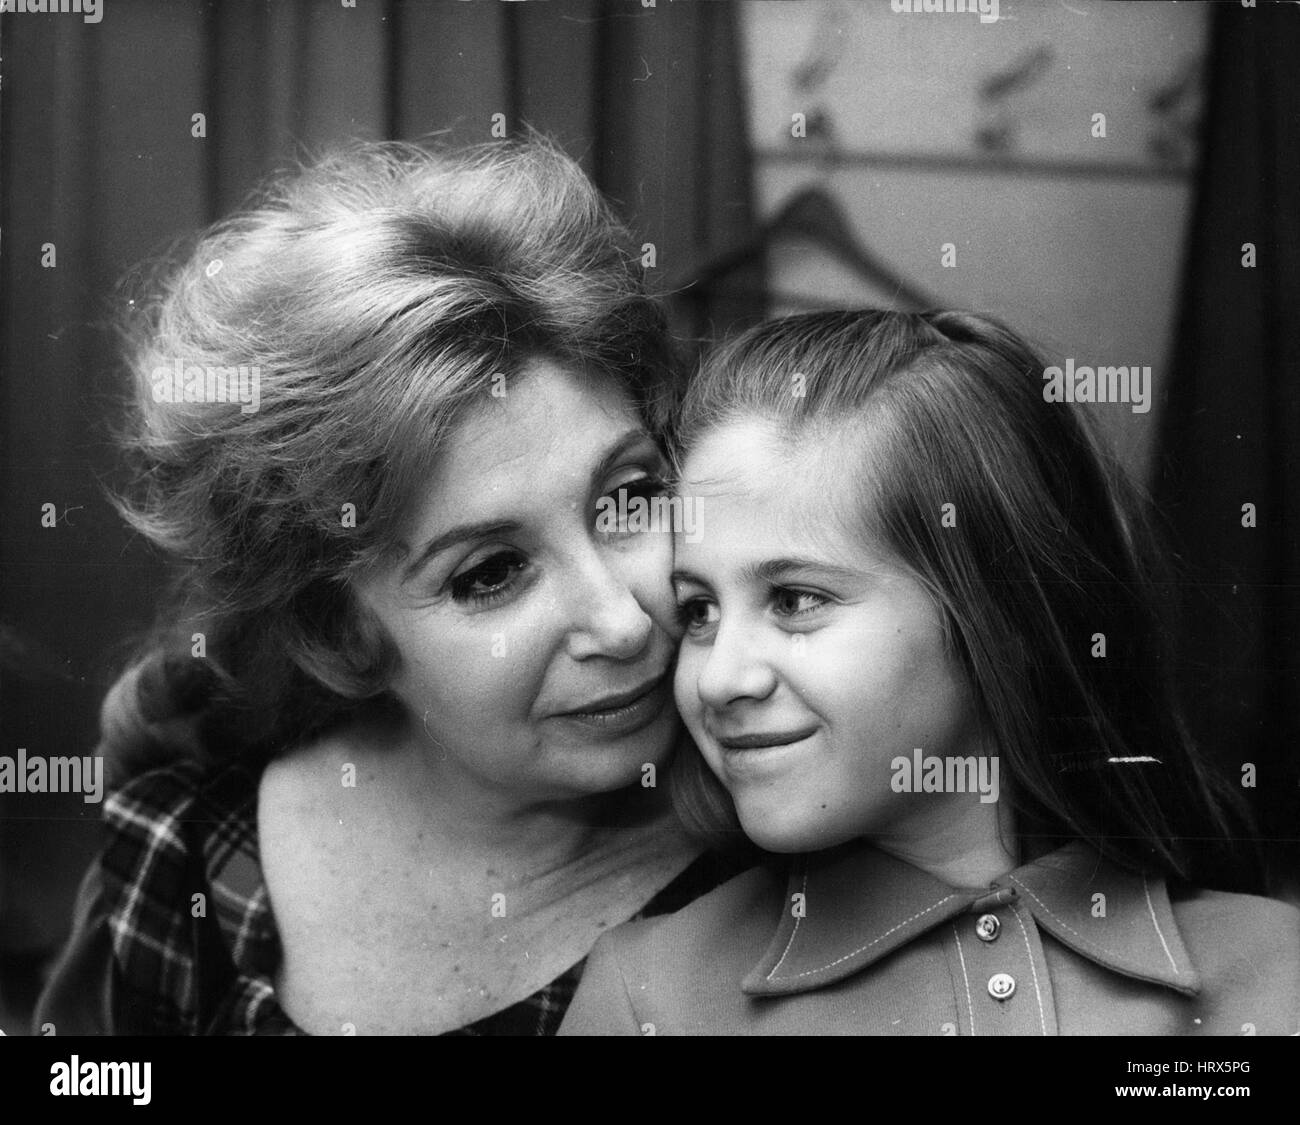 Dec. 12, 1970 - 11-year-old Muffy who is deaf arrives here for her opera Mother's British debut at Covent Garden. Beverly Sills, the idol of America's opera public, makes her British debut at the Royal Opera House, Covent Garden, on Wednesday December 23rd. Her 11-year-old daughter, Muffy has come here for the occasion. Muffy adores opera yet the sad thing is that she has never heard her mother sing a note, for she is deaf. Beverly is now rated on both sides of the Atlantic as something special among operatio sopranos. Photo shows Beverly Sills pictures with her 11-year-old daughter Muffy in h Stock Photo